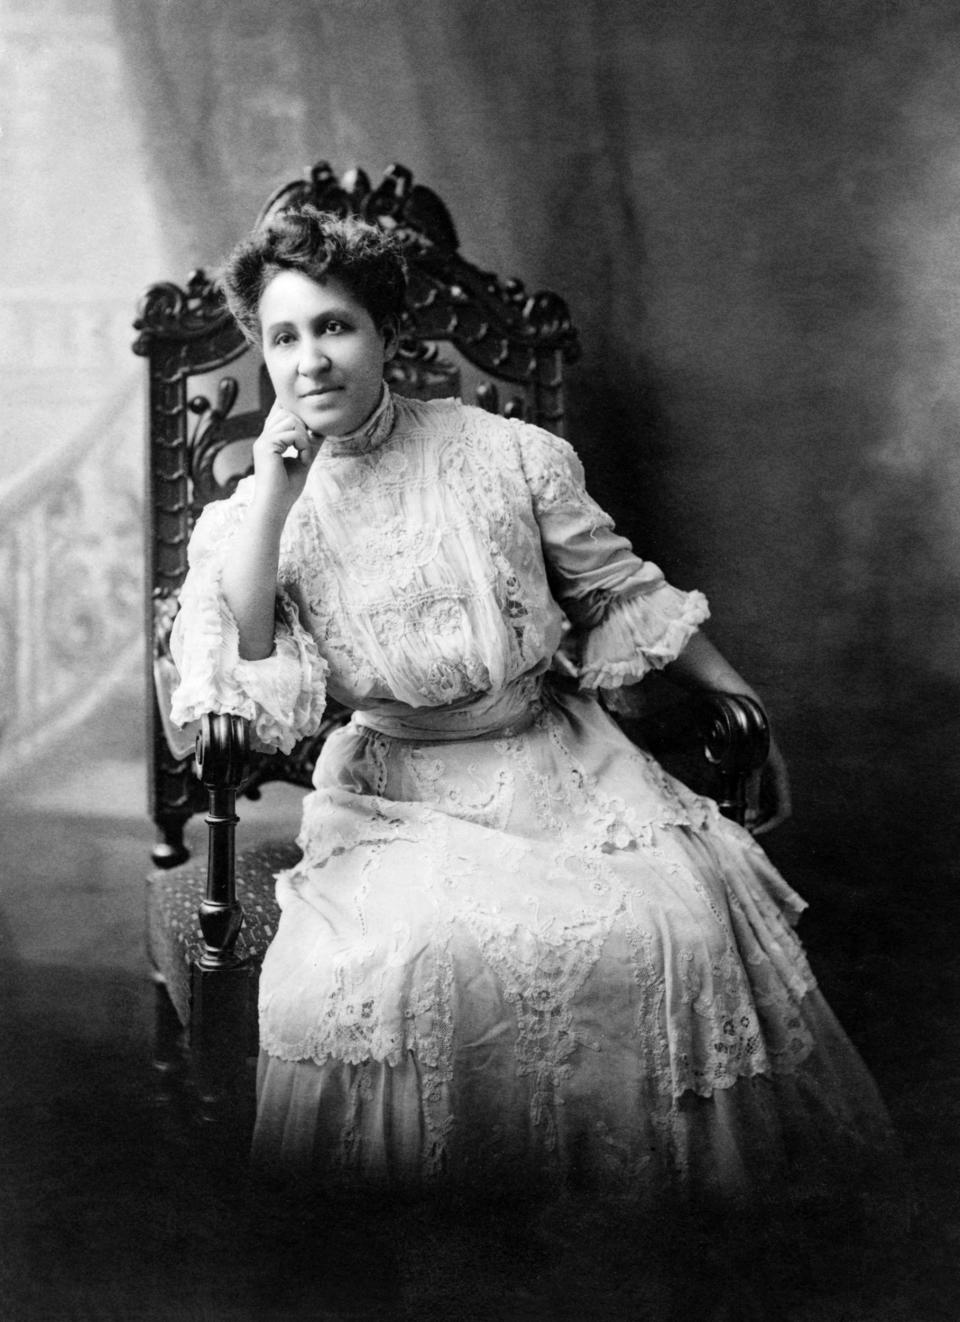 Image: Mary Church Terrell (GHI Vintage / Universal History Archive/Universal Images Group via Getty Images file)